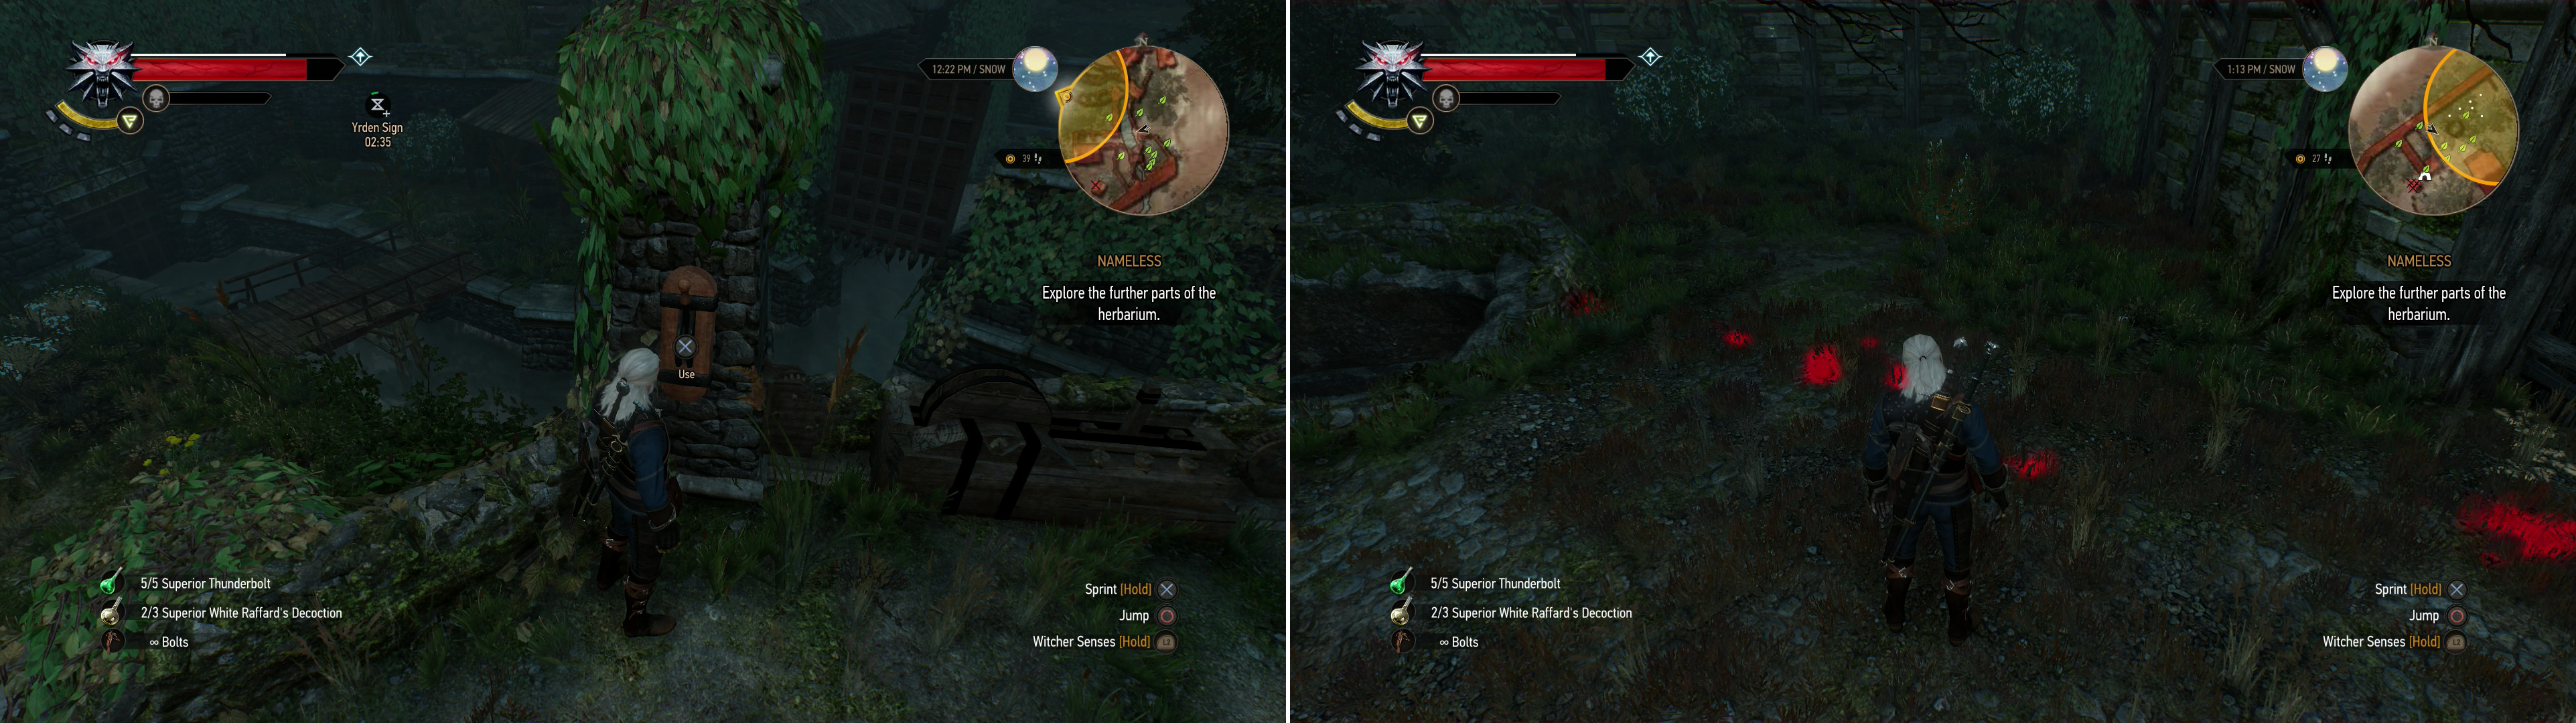 Activate a lever to open a sluice gate (left). Use your Witcher Senses to follow Craven’s retreat into a well (right).